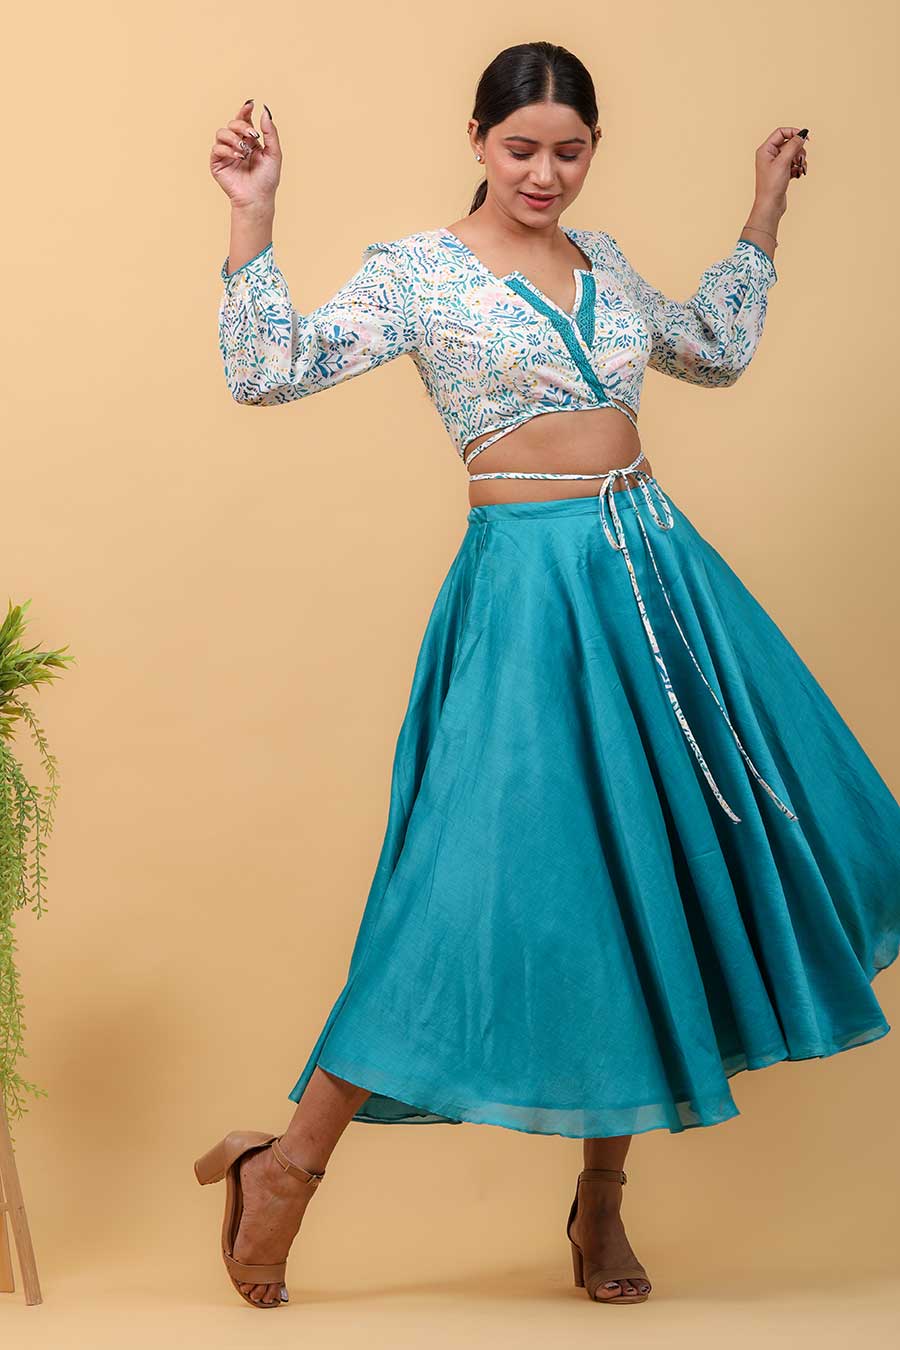 Hand Block Printed Wrap Top With Aqua Blue Skirt Co-ord Set